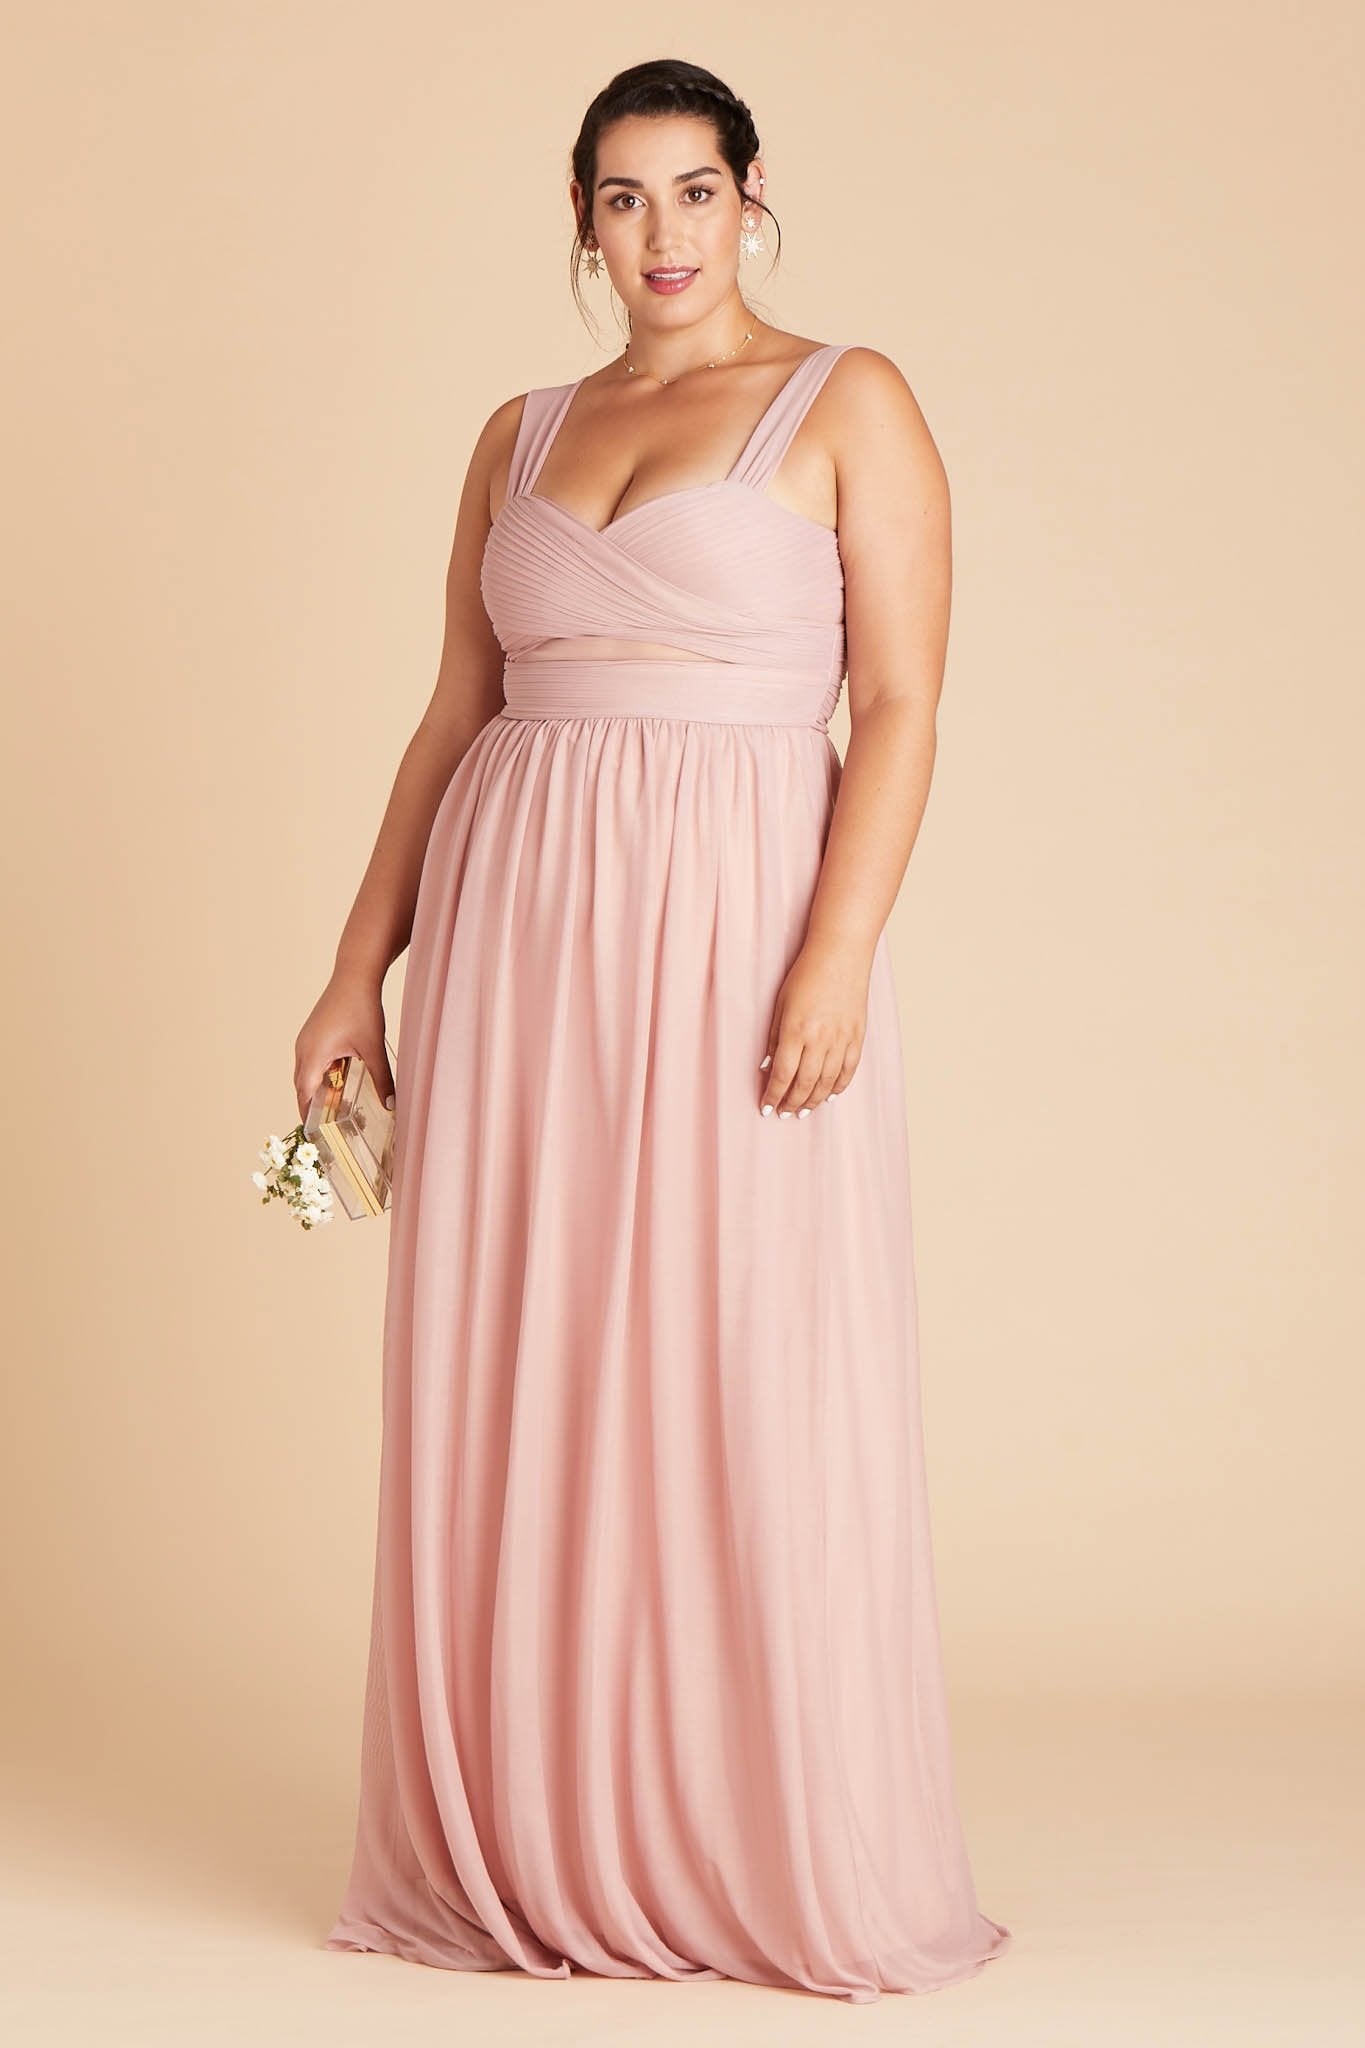 Front view of the Elsye Plus Size Bridesmaid Dress in dusty rose mesh worn by a curvy model with a light skin tone.